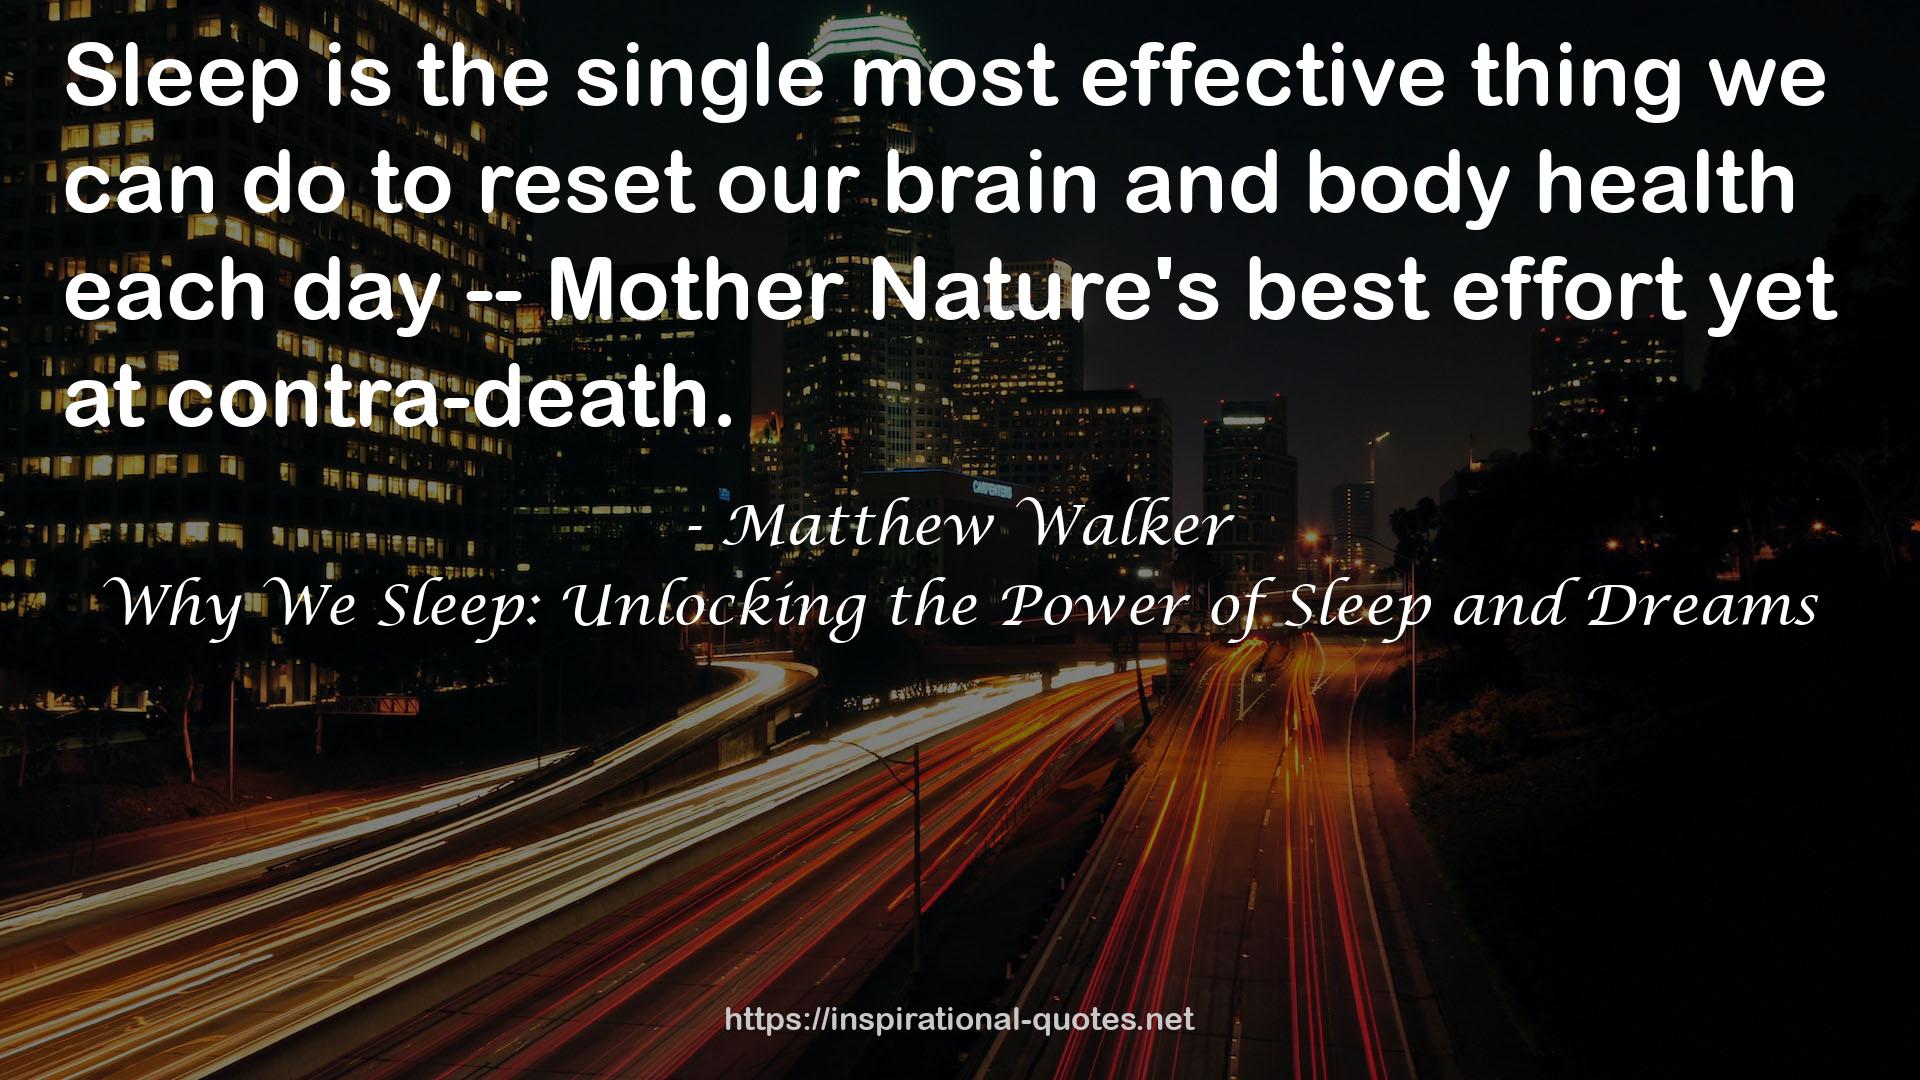 Why We Sleep: Unlocking the Power of Sleep and Dreams QUOTES